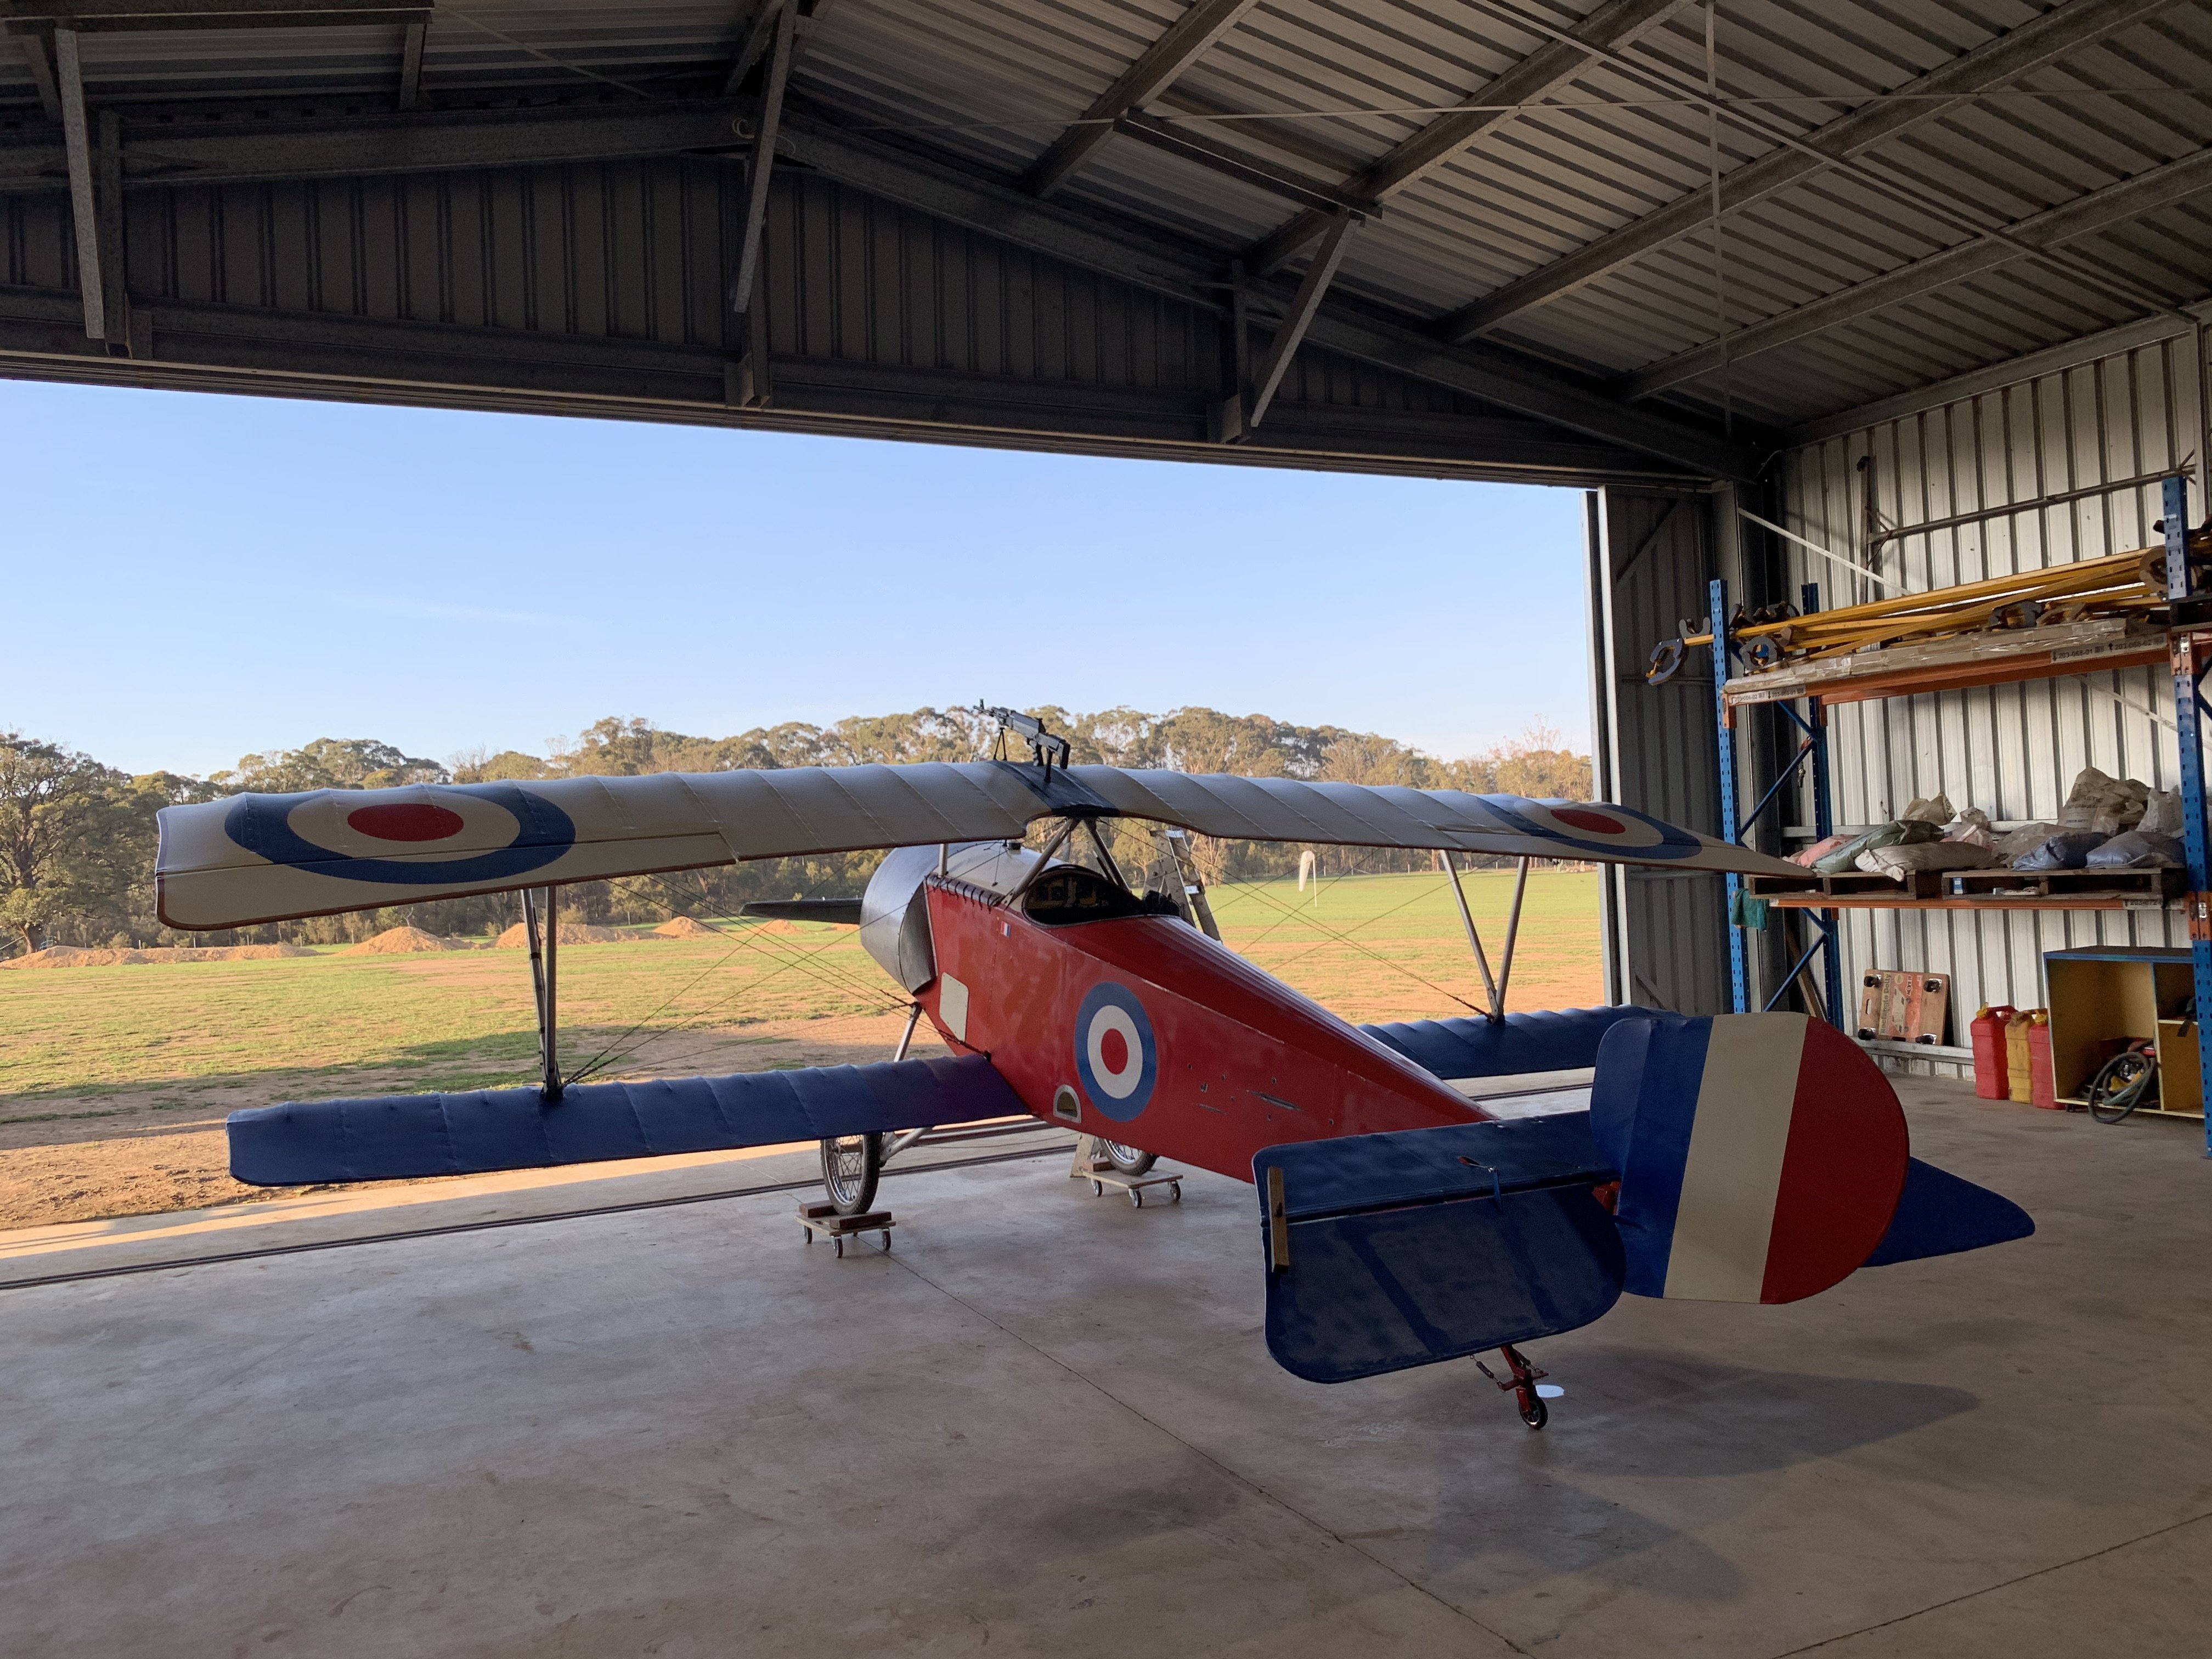 More information about "87% scale replica Nieuport"